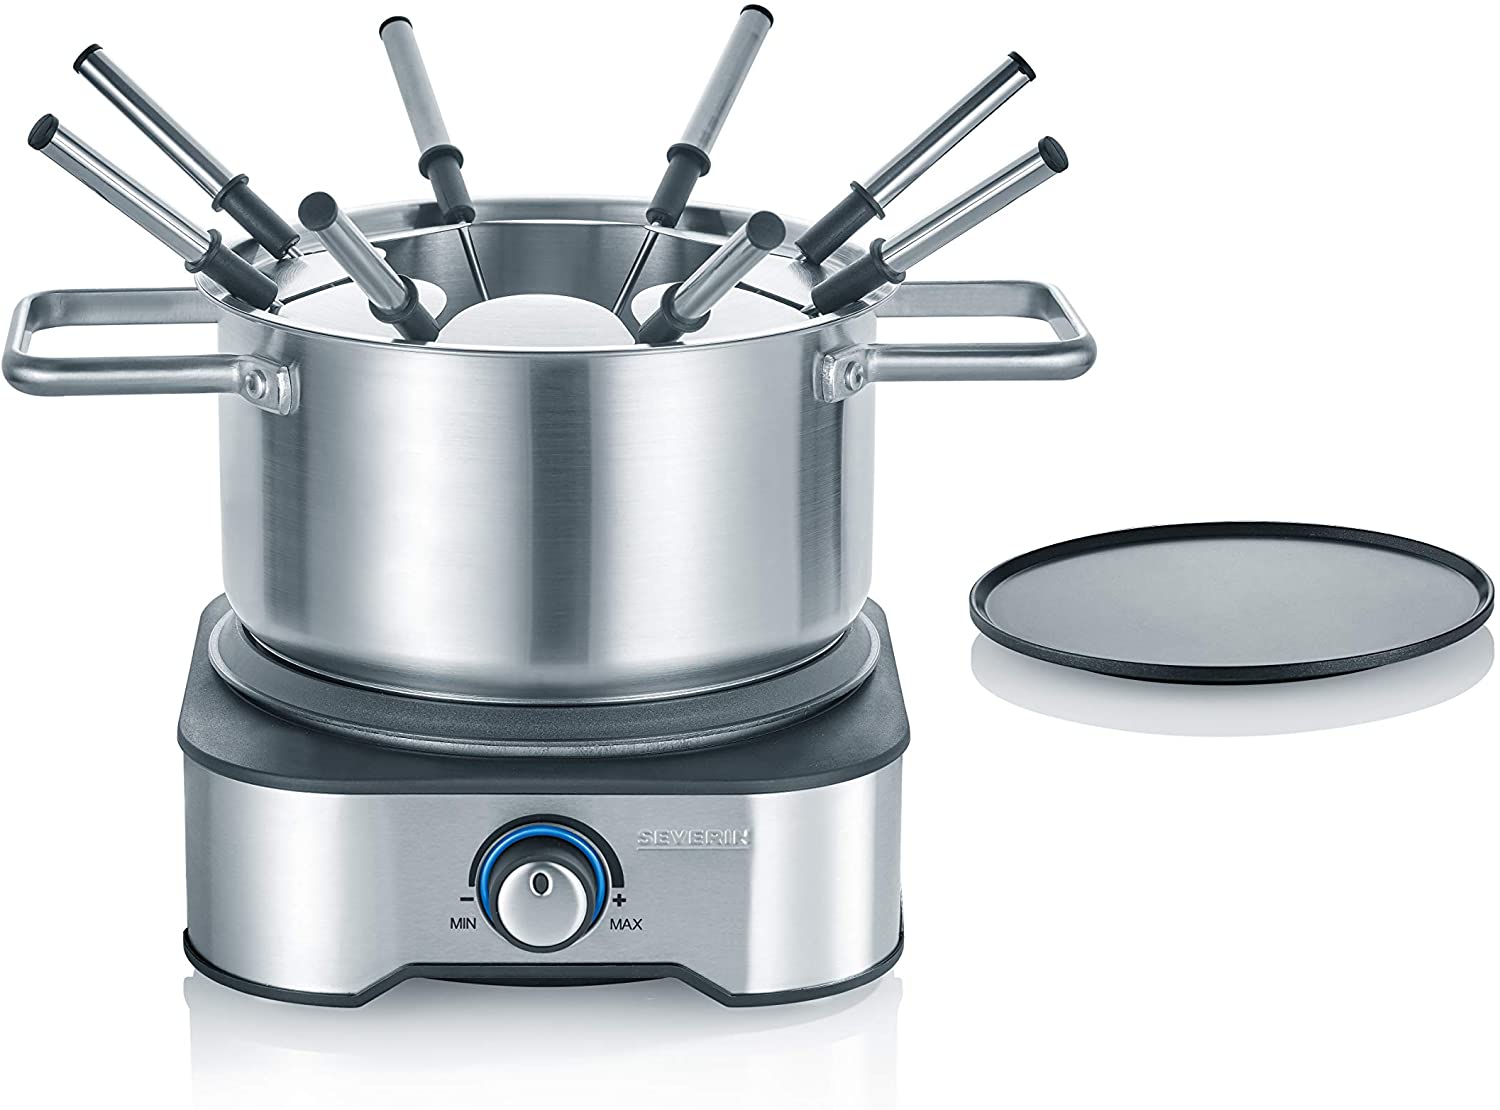 Severin FO 2409 Fondue / Crepe Combination Set 18 / 8 Stainless Steel 1.3 L